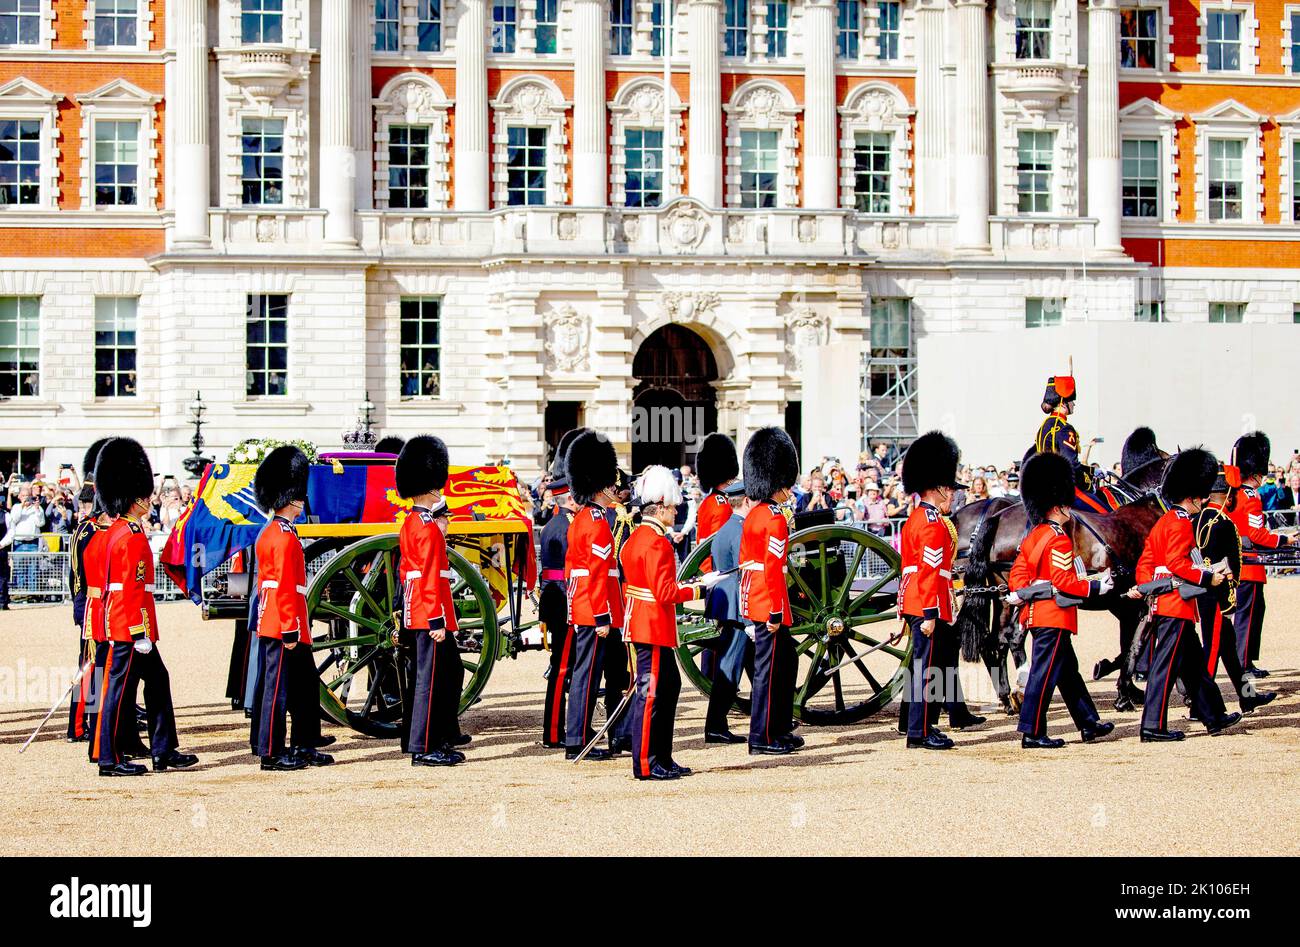 London, UK. 14th Sep, 2022. The Coffin of Queen Elizabeth II of the United Kingdom is transported from Buckingham Palace via the Horse Guards to Westminster Hall in London, on September 14, 2022, on a gun carriage A ceremony will be held in Westminster Hall to mark the arrival of Her Majestys Coffin Photo: Albert Nieboer/Netherlands OUT/Point de Vue OUT Credit: dpa picture alliance/Alamy Live News Stock Photo